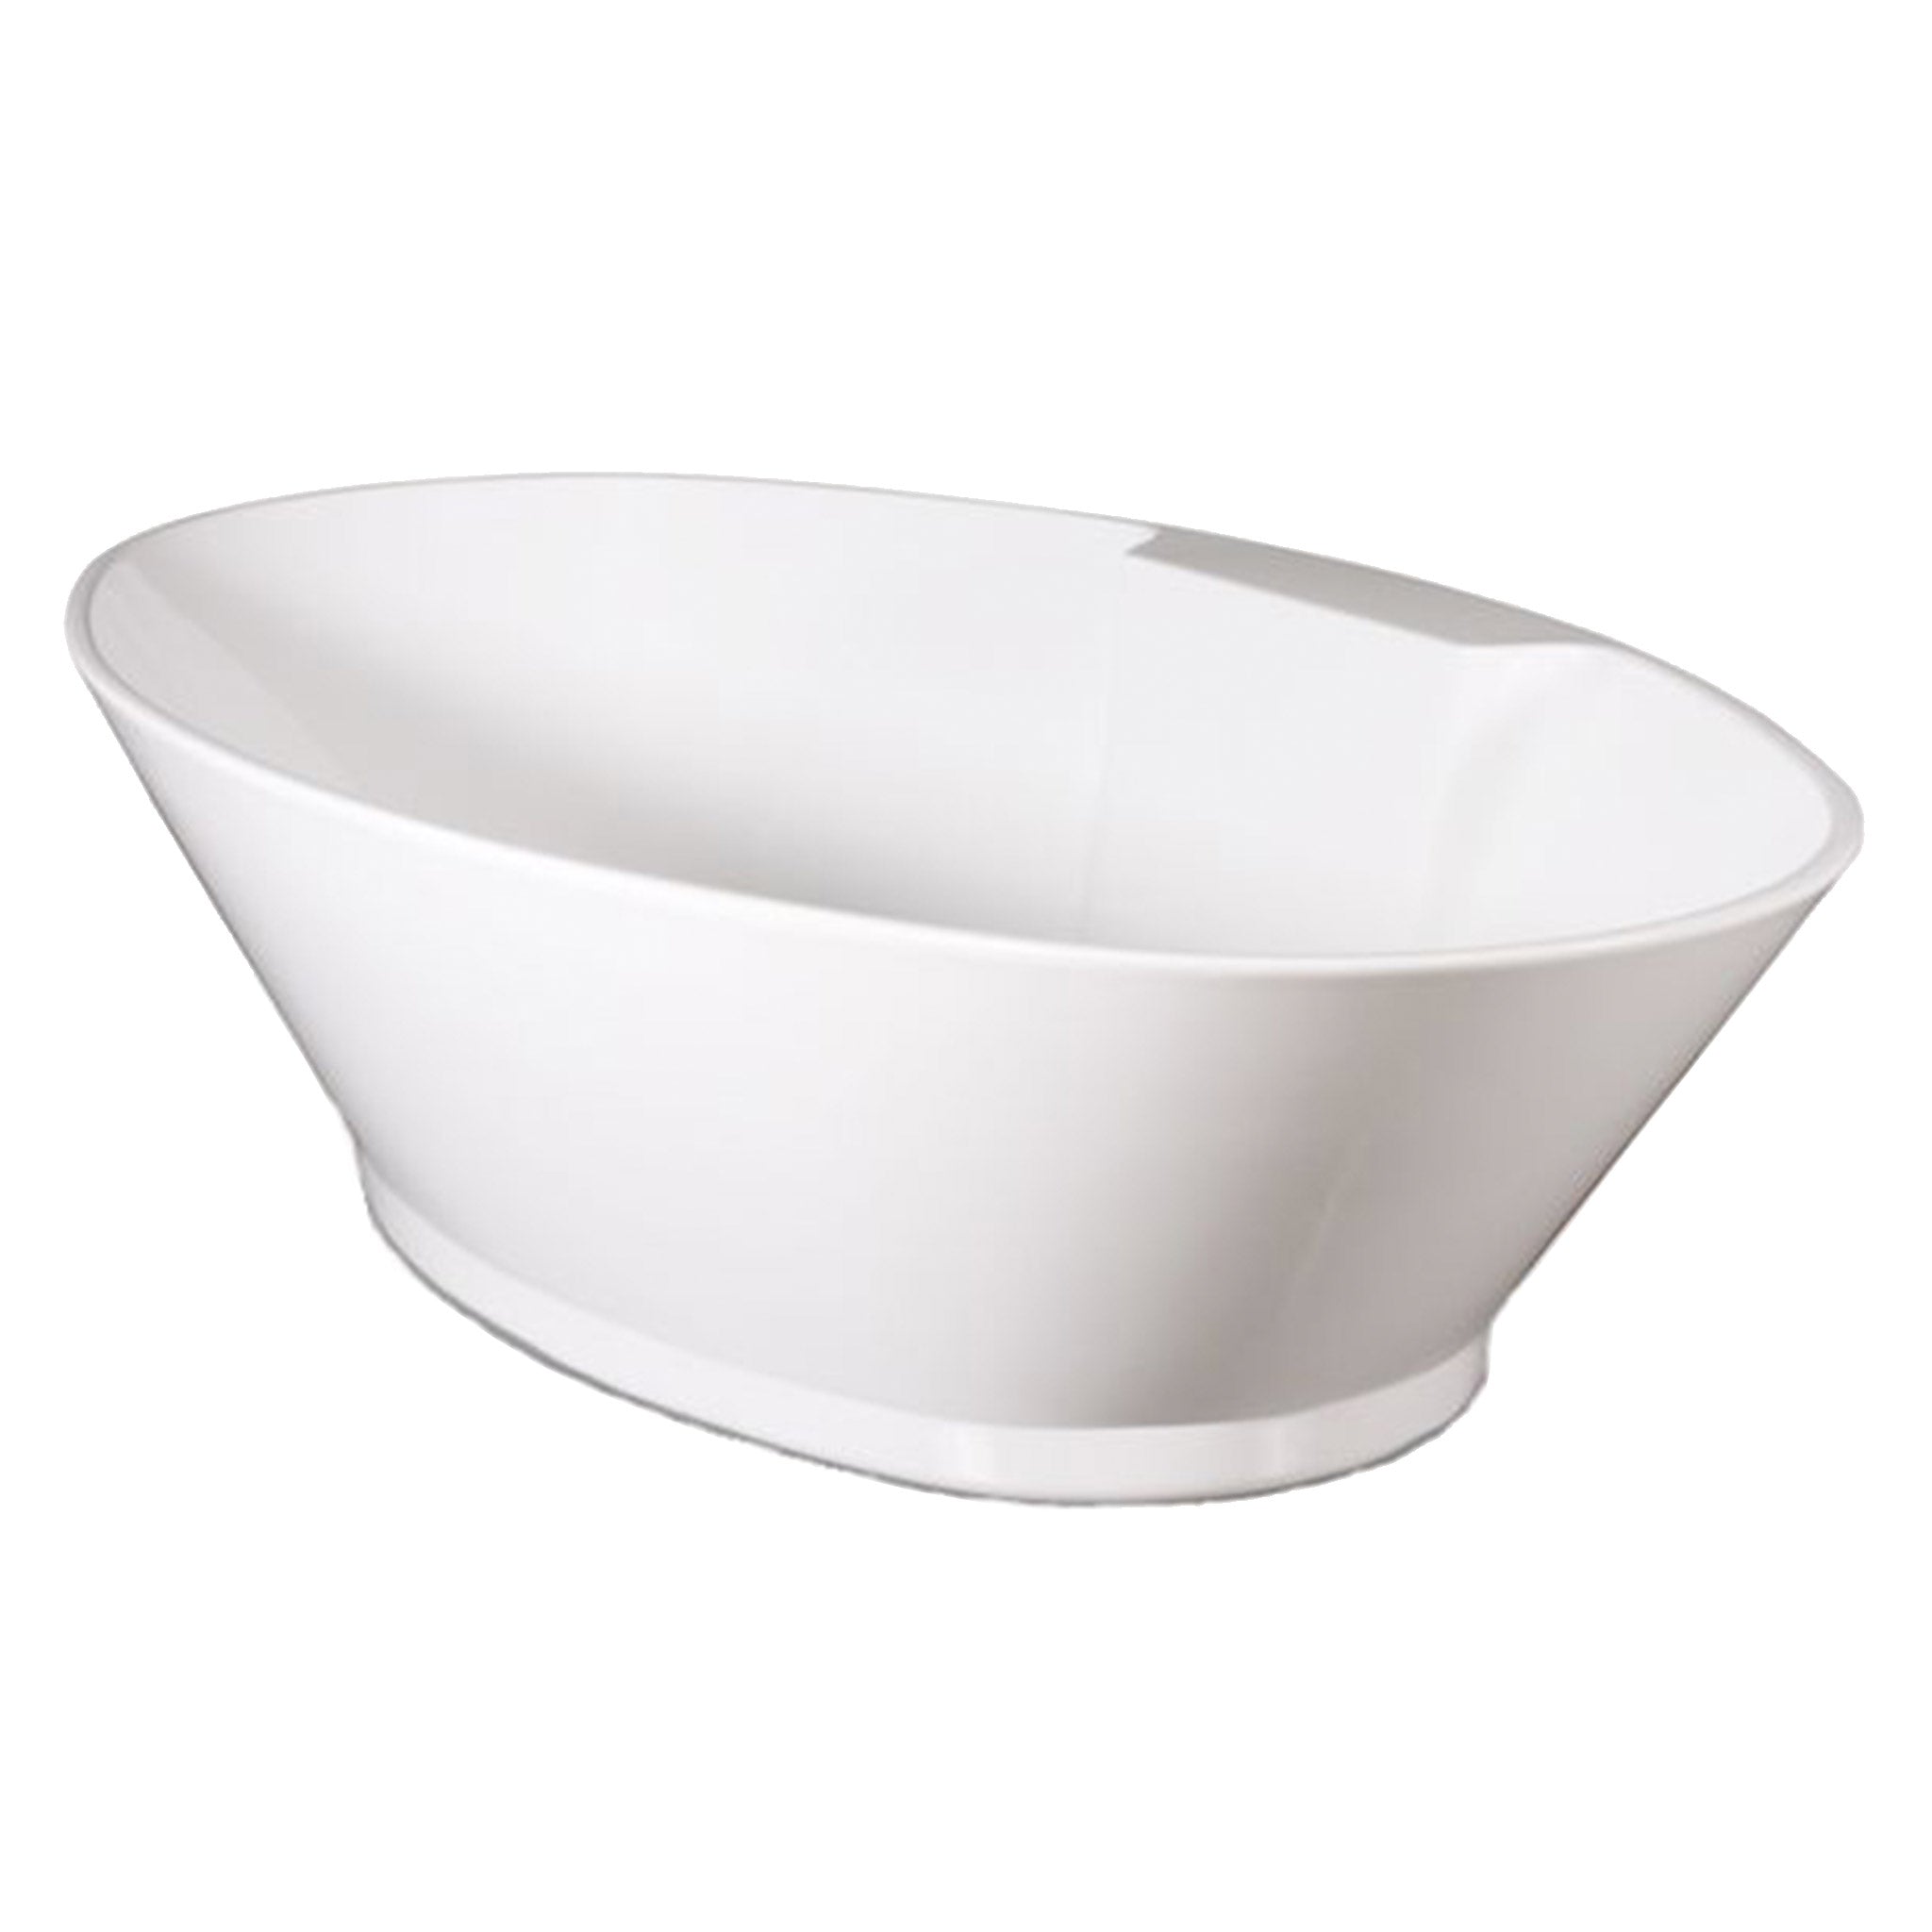 BC Designs Chalice Major Double Ended Acrymite Bath 1780 x 935mm